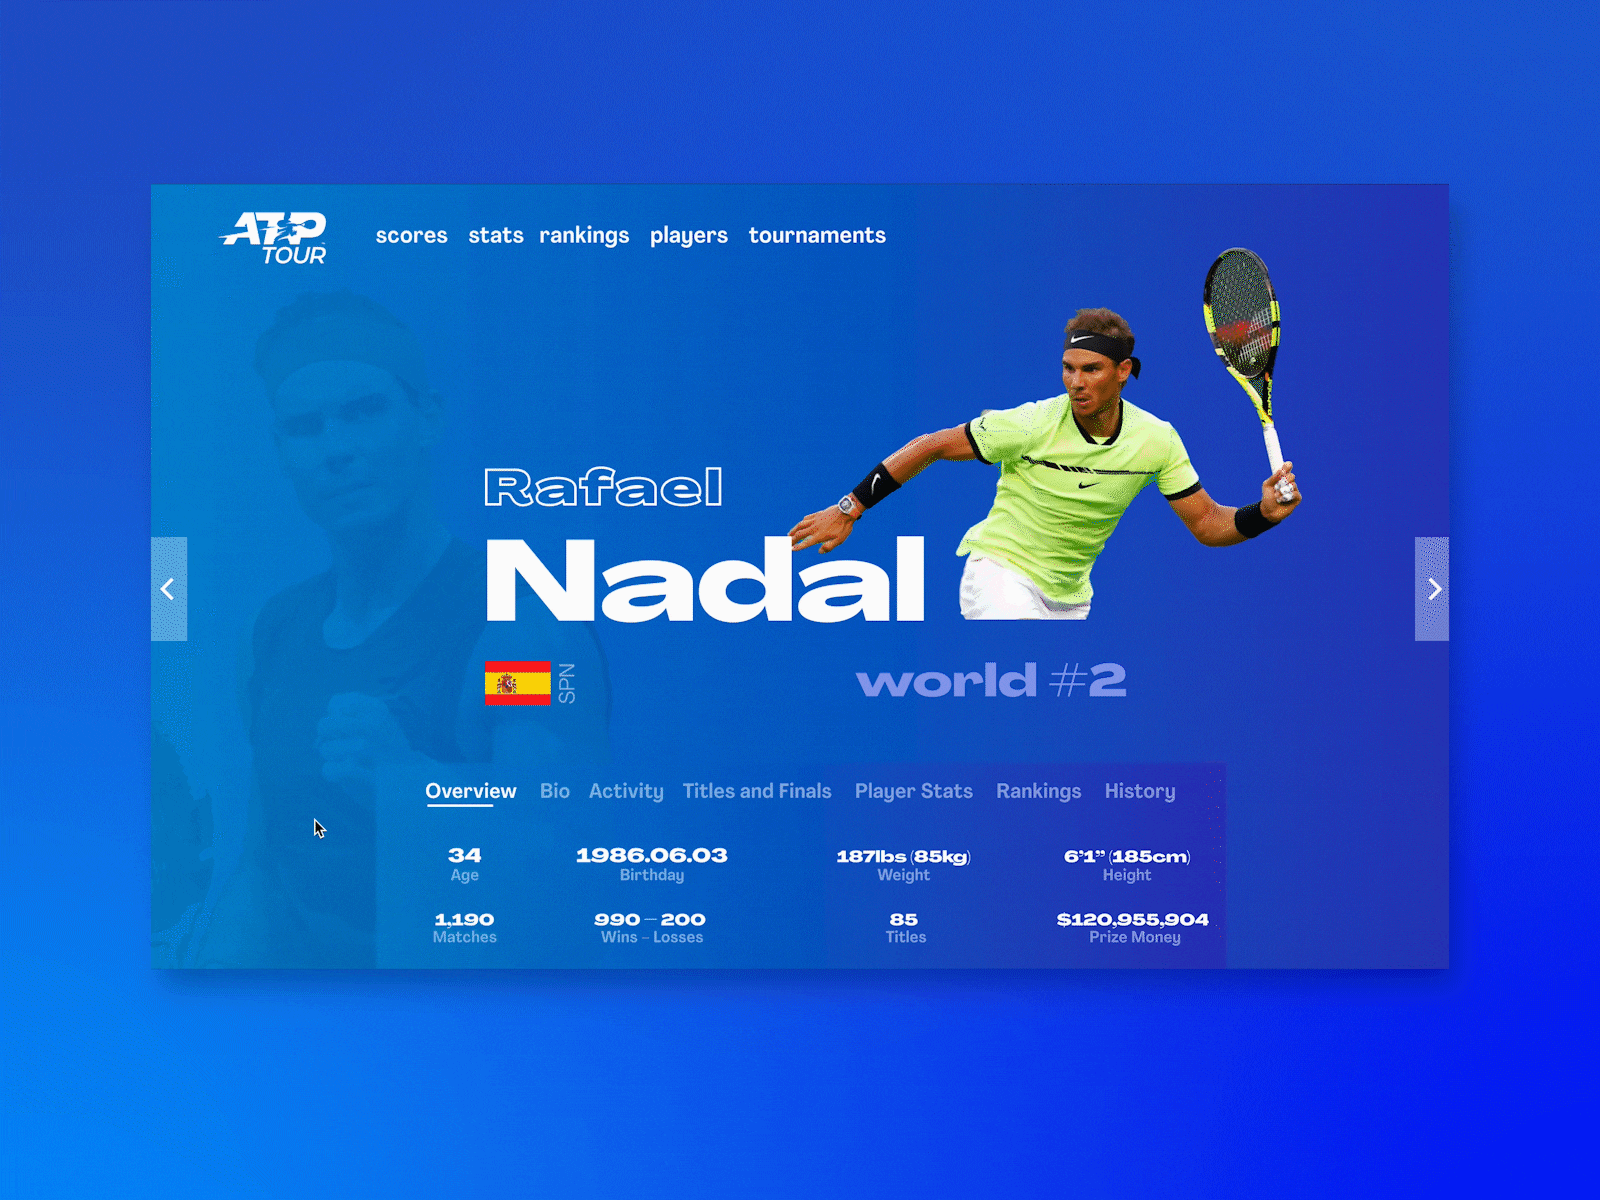 Atp Tour Wta Tour designs, themes, templates and downloadable graphic elements on Dribbble